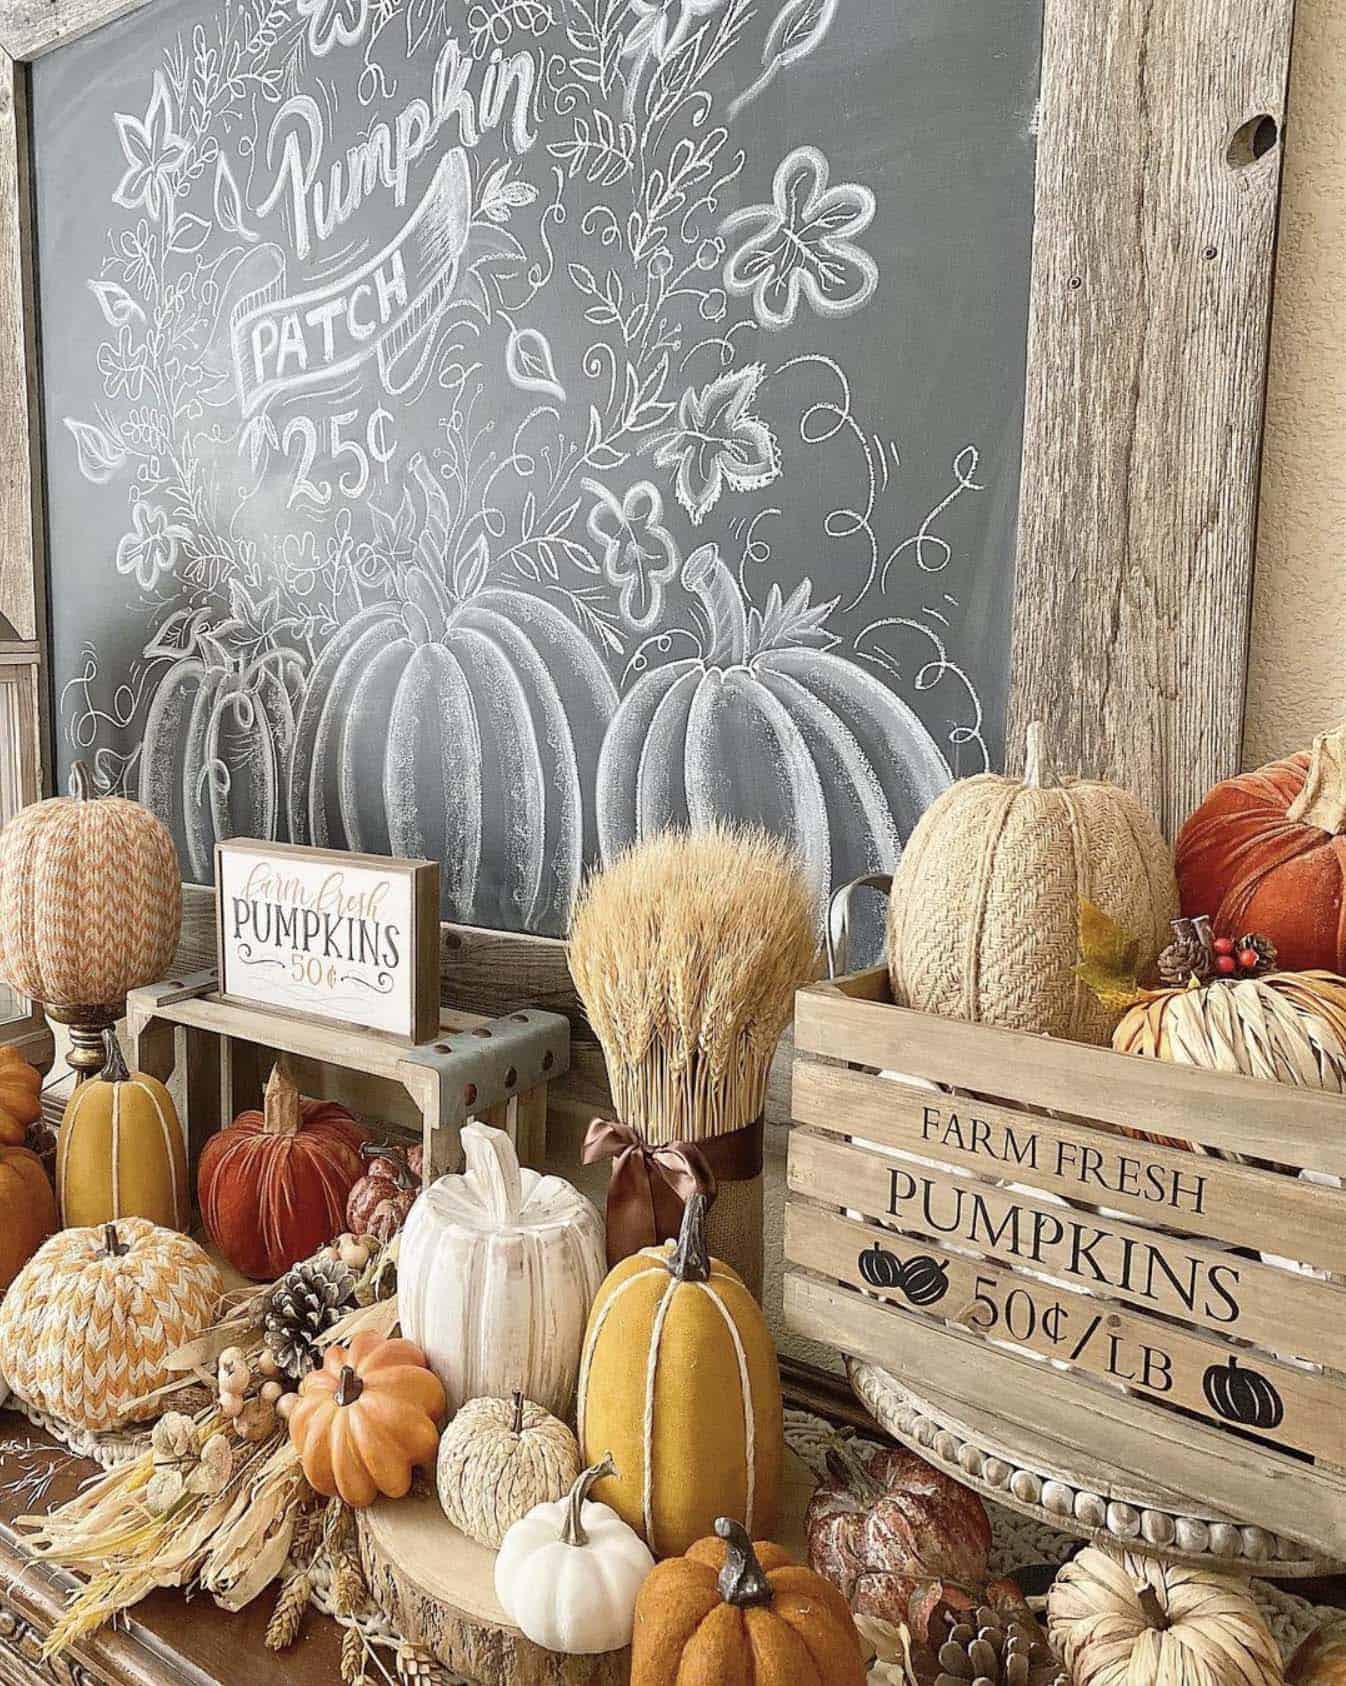 chalkboard vignette with fall-inspired artwork and a crate with pumpkins